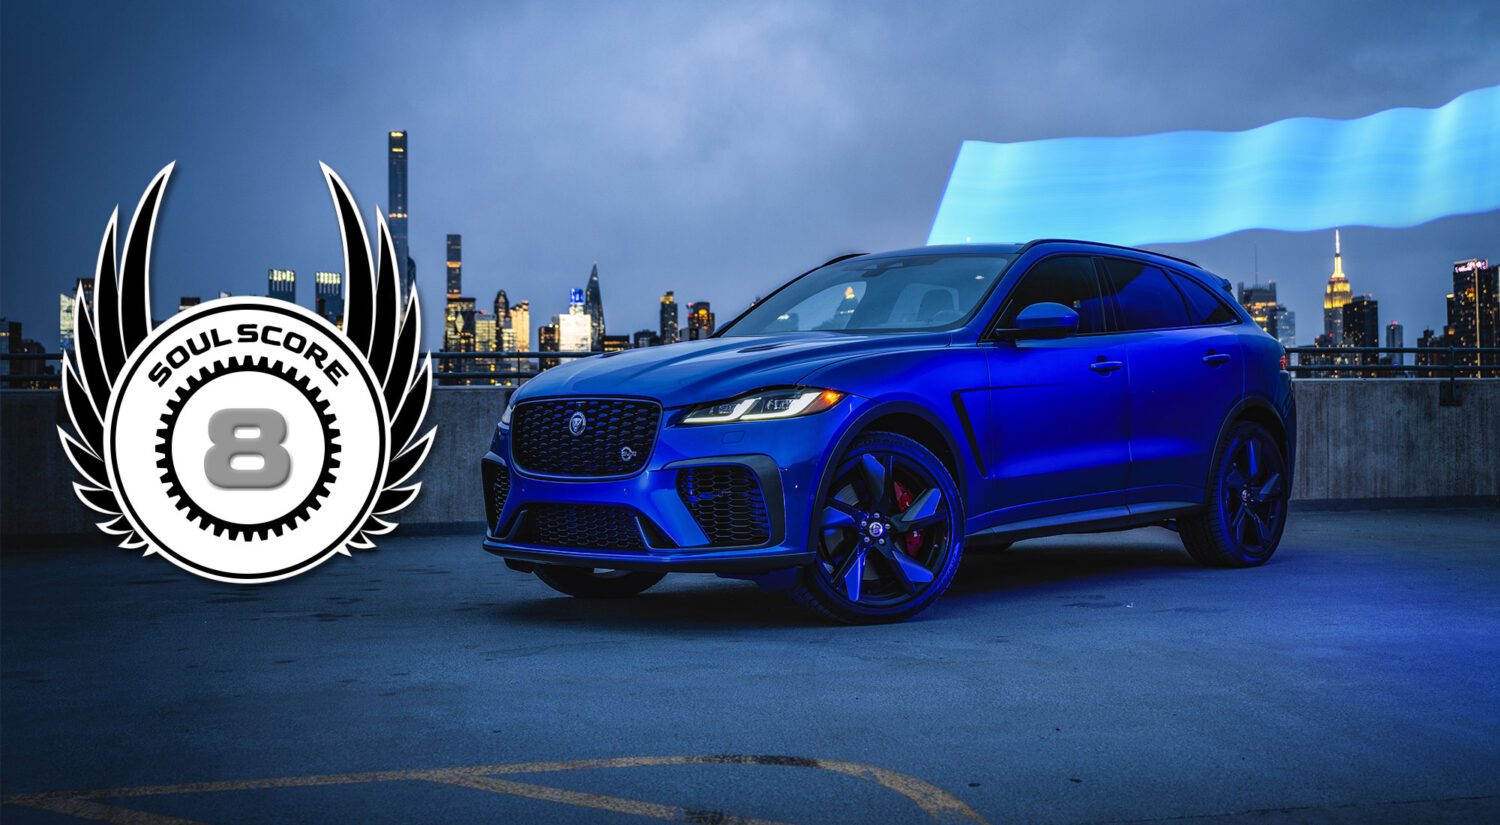 The Jaguar F-PACE SVR is all the performance you need